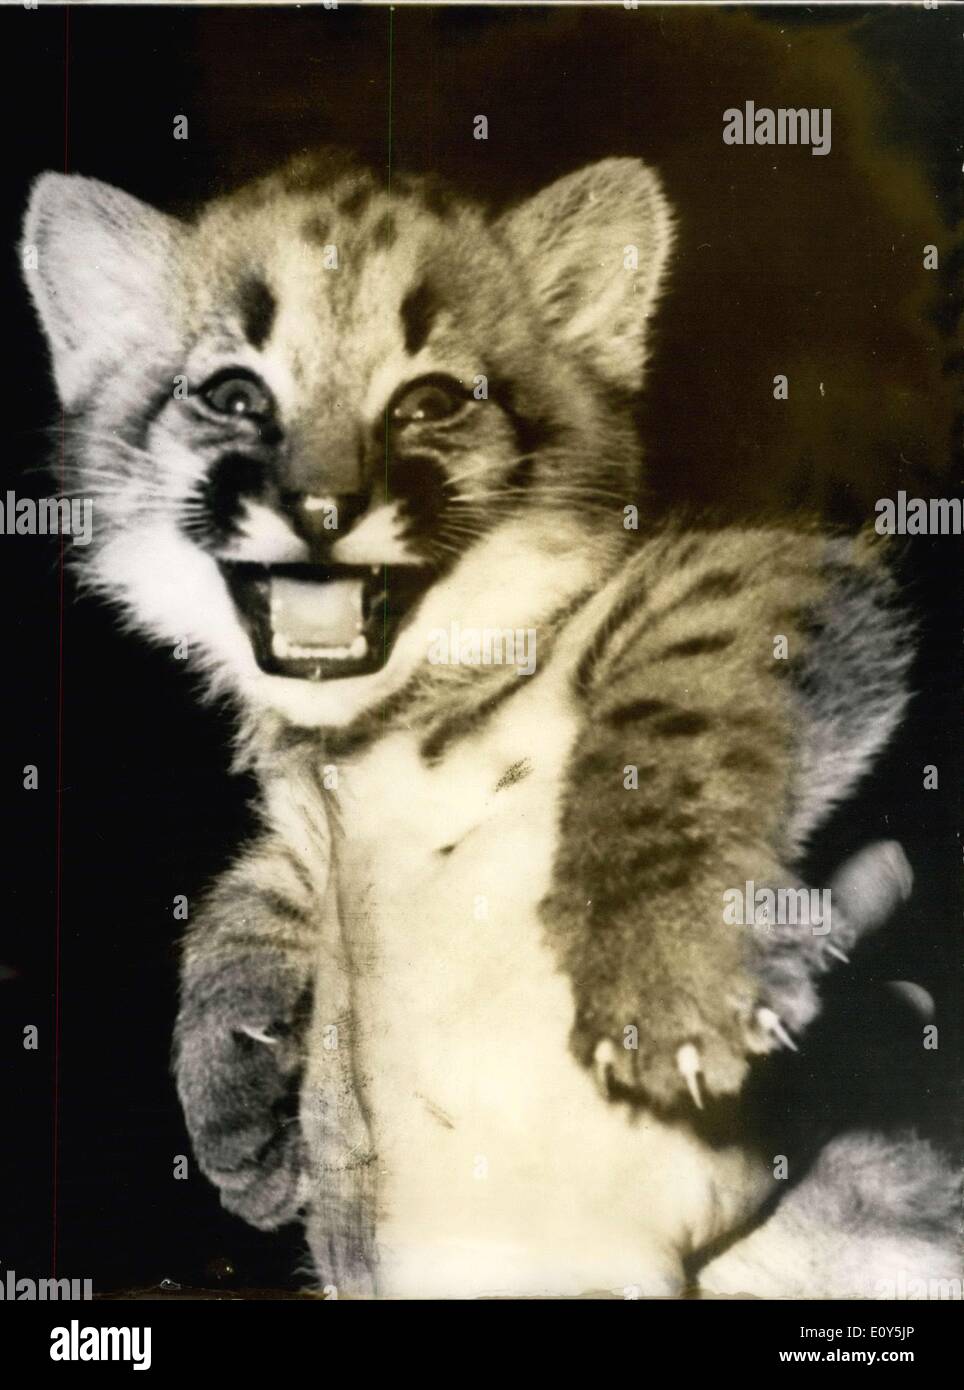 Feb. 21, 1969 - Smile Please!: Photo shows This little Puma, born four weeks ago at Zurich Zoo, provided photographers with this delightful expression. Who says animals can't laugh! Stock Photo